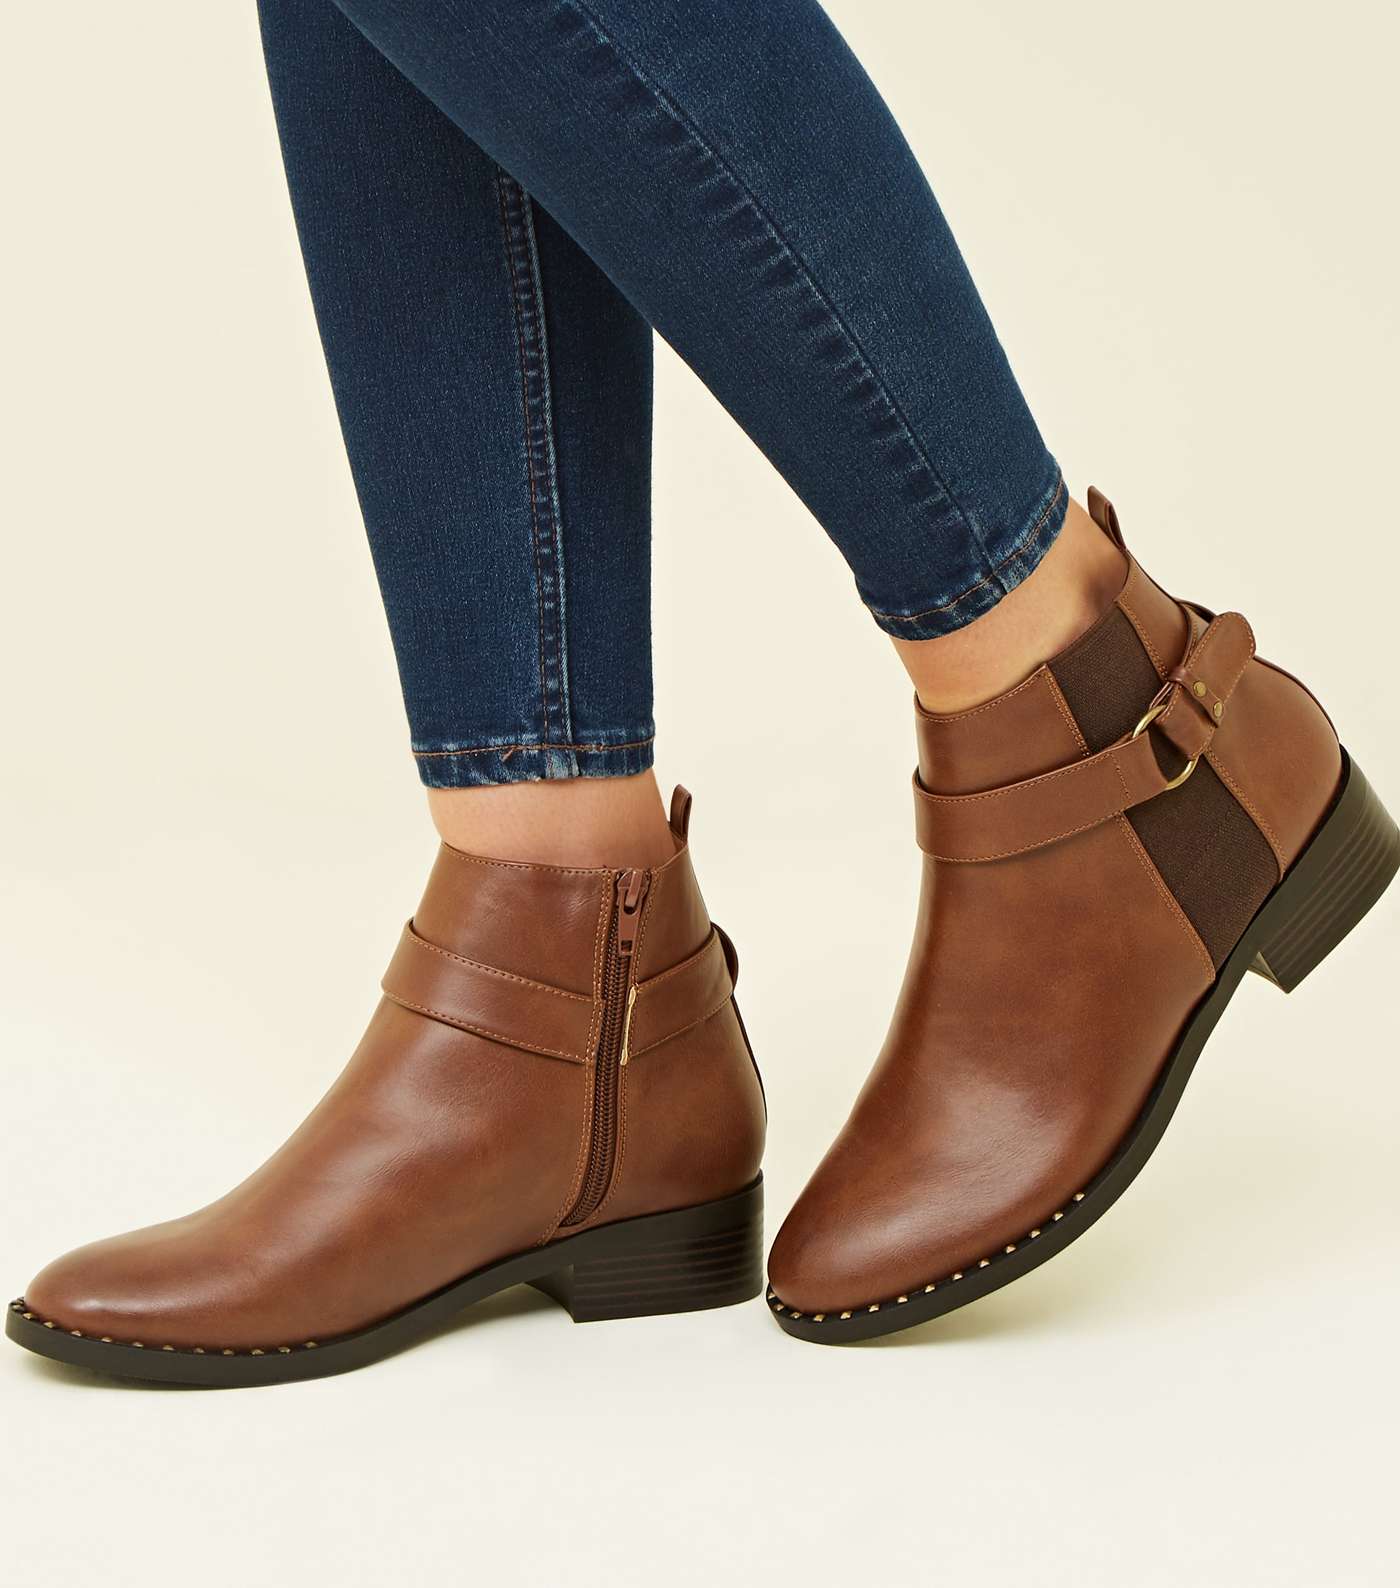 Tan Studded Low Heel Chelsea Boots Image 2